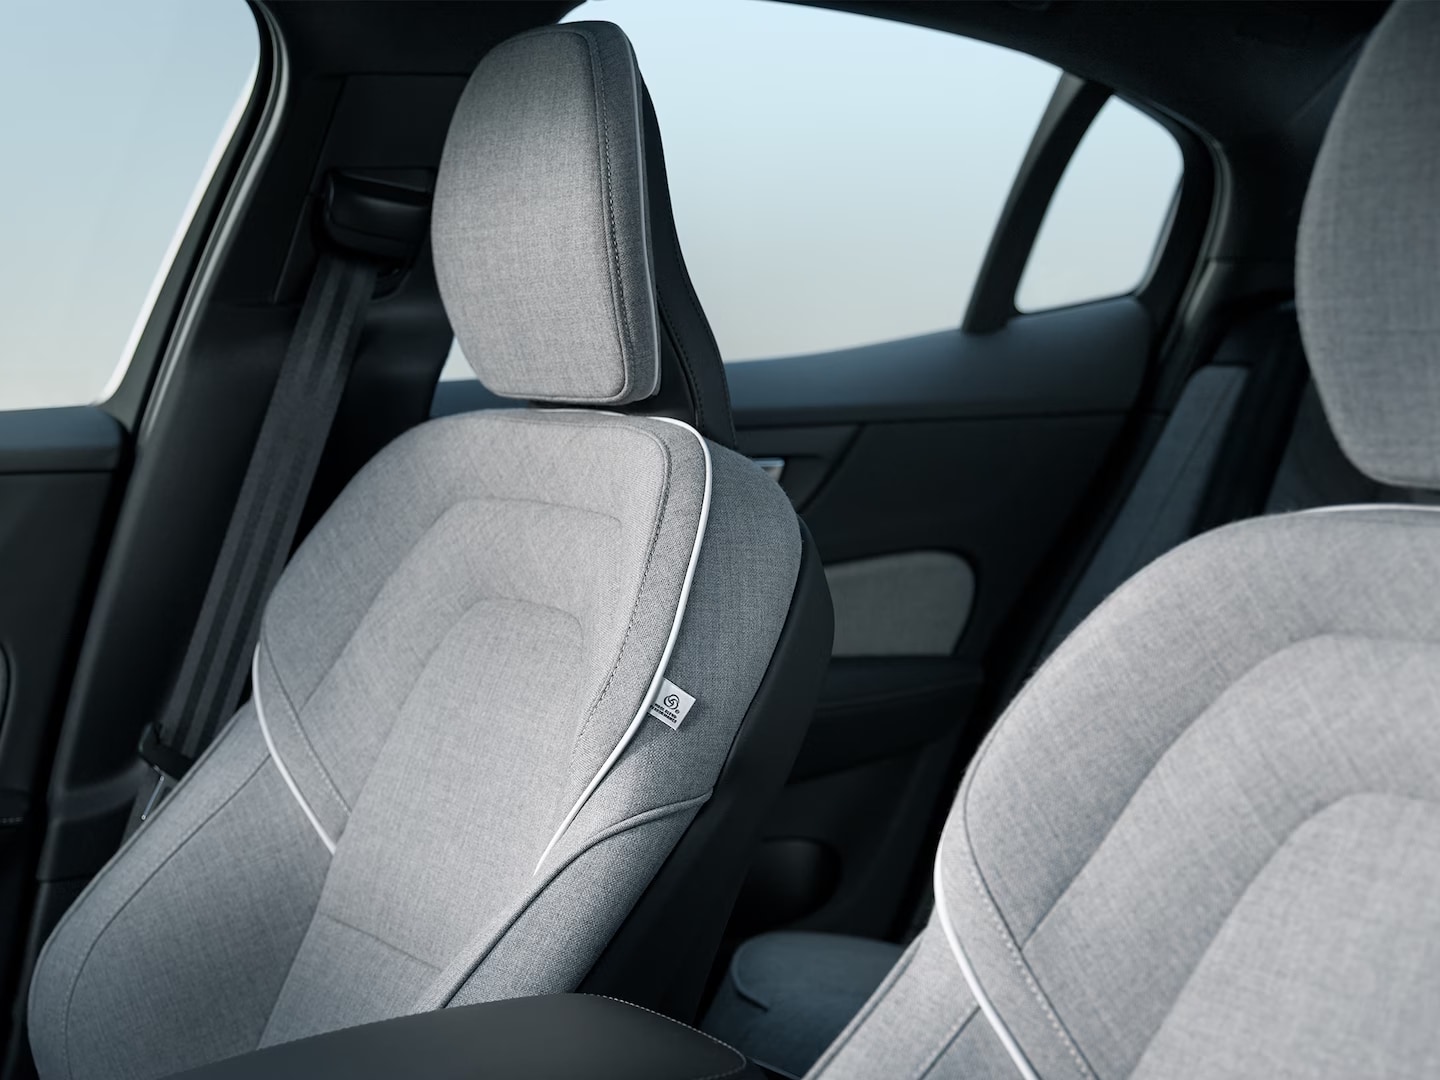 The Volvo S60 Recharge plug-in hybrid’s front passenger and driver’s seats in grey Tailored Wool Blend upholstery with white trim.